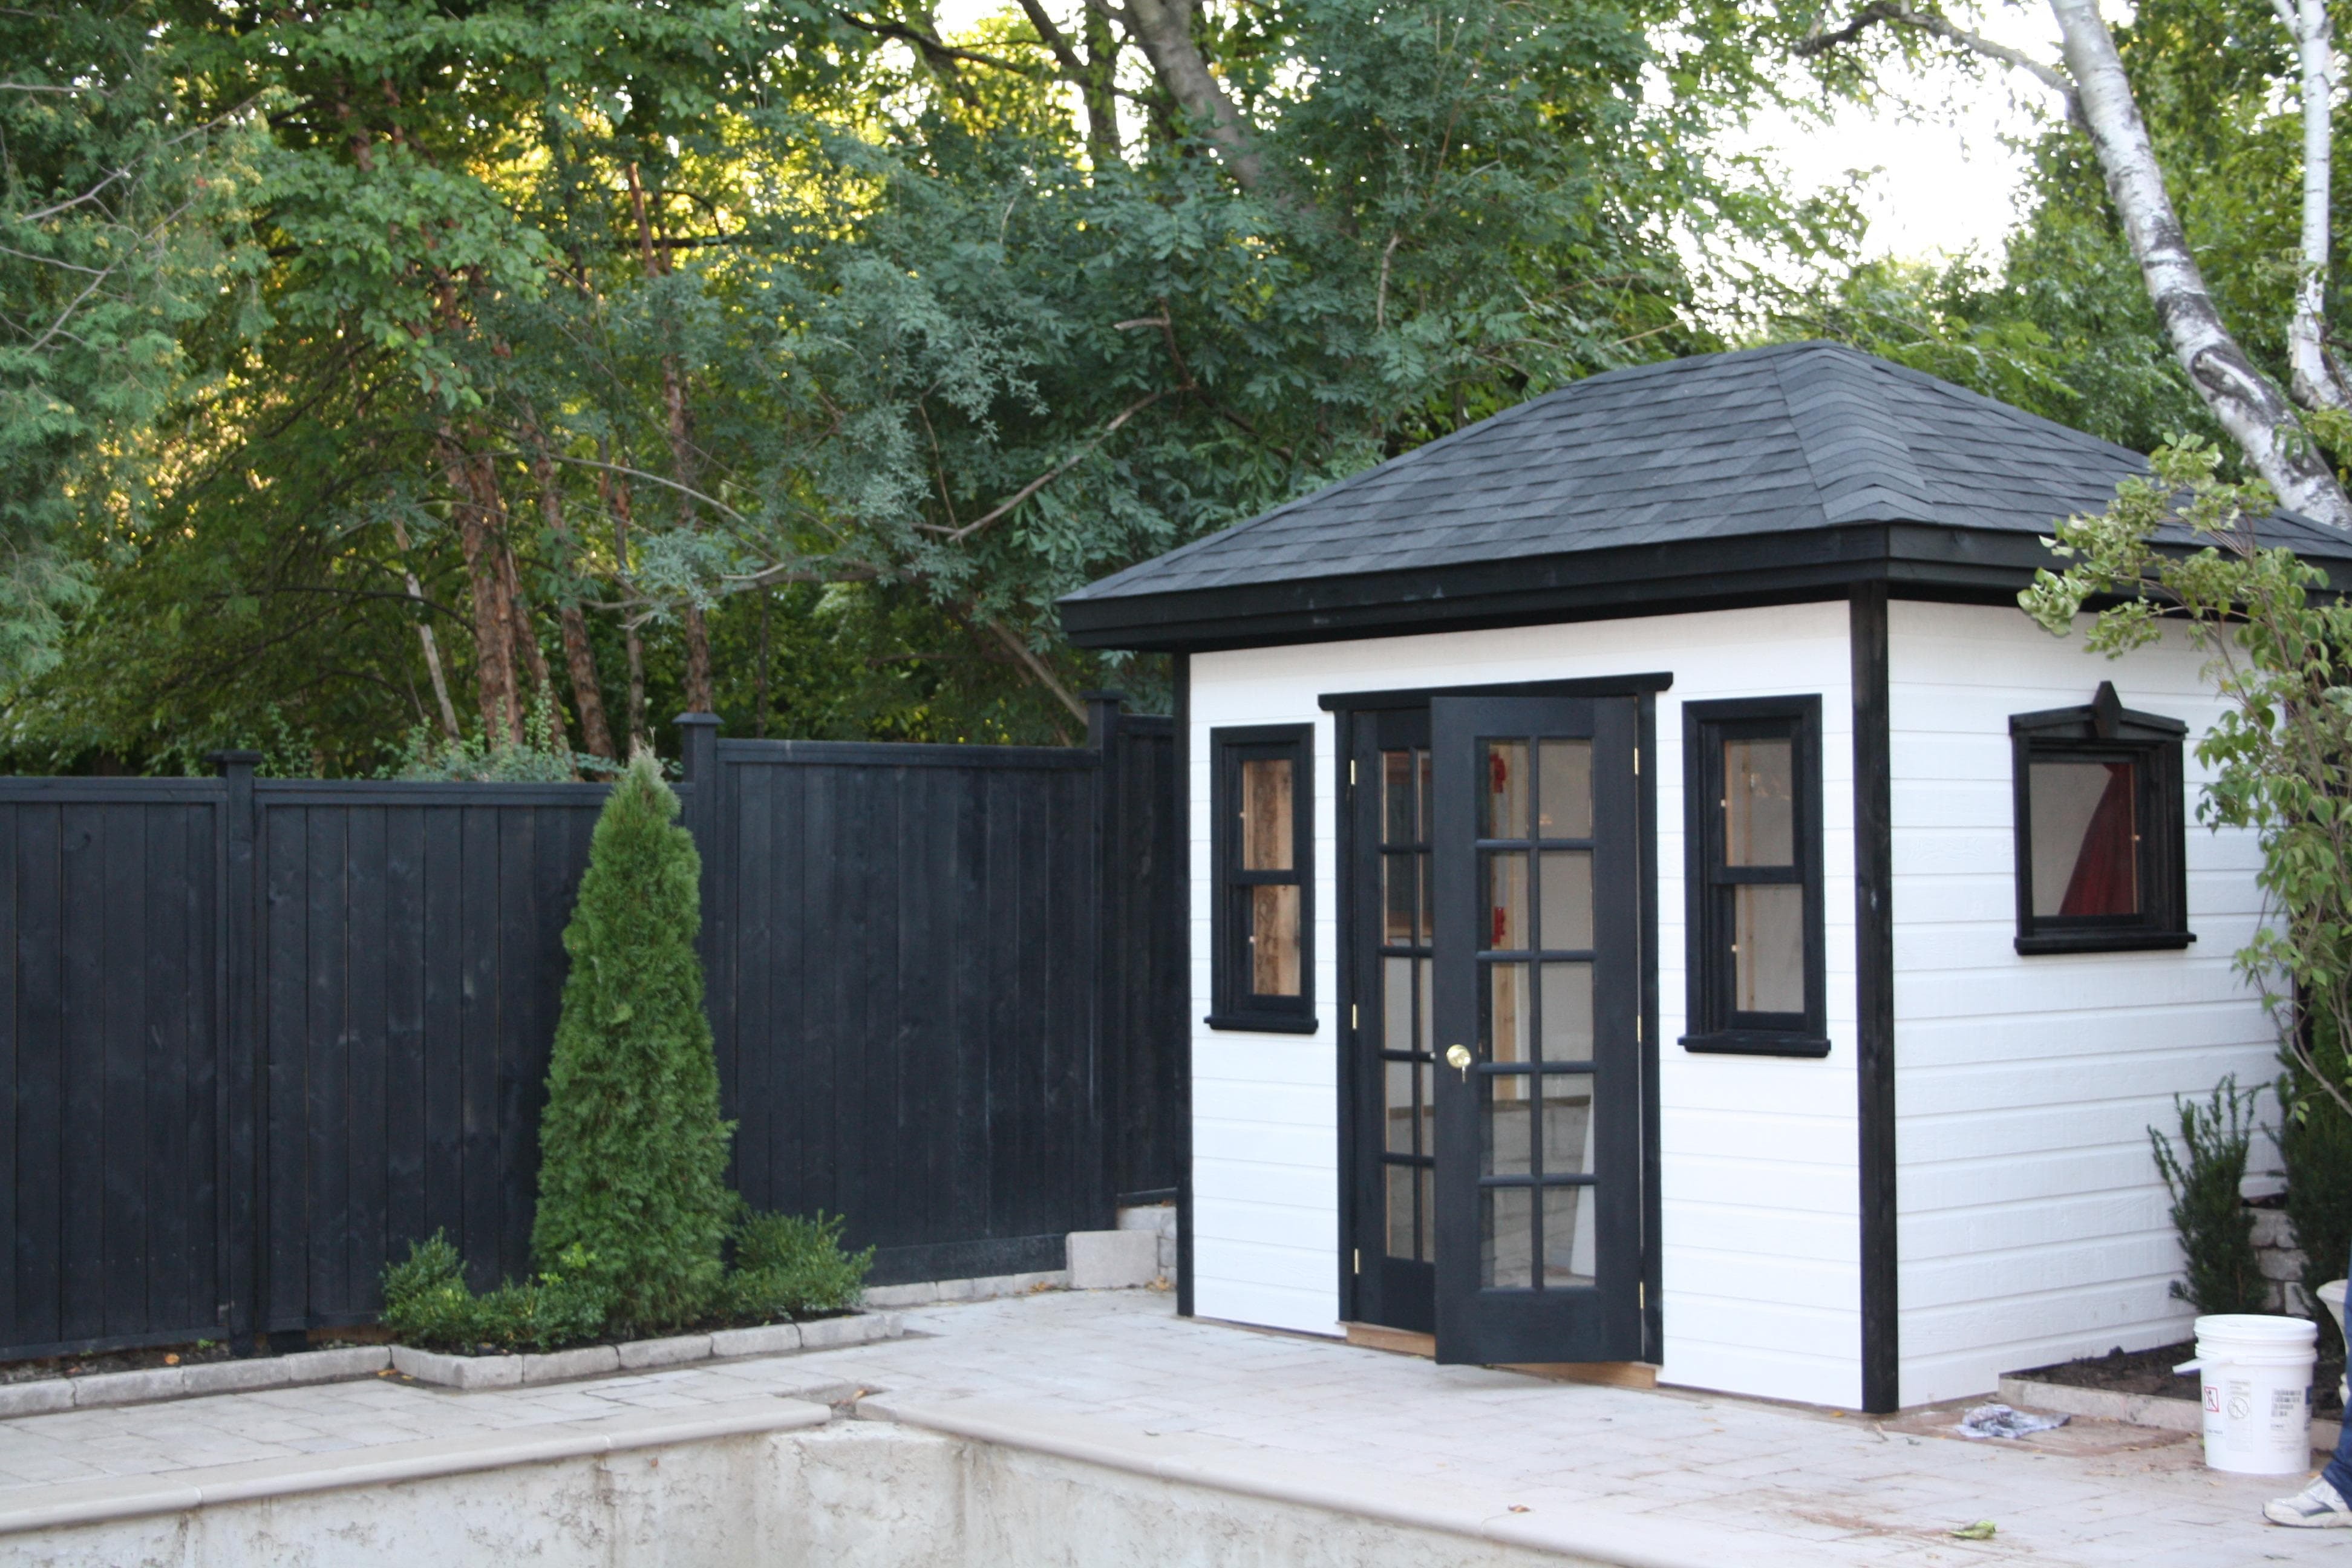 Sonoma 7x12 garden shed with double doors in Toronto Ontario. ID number 134985-3